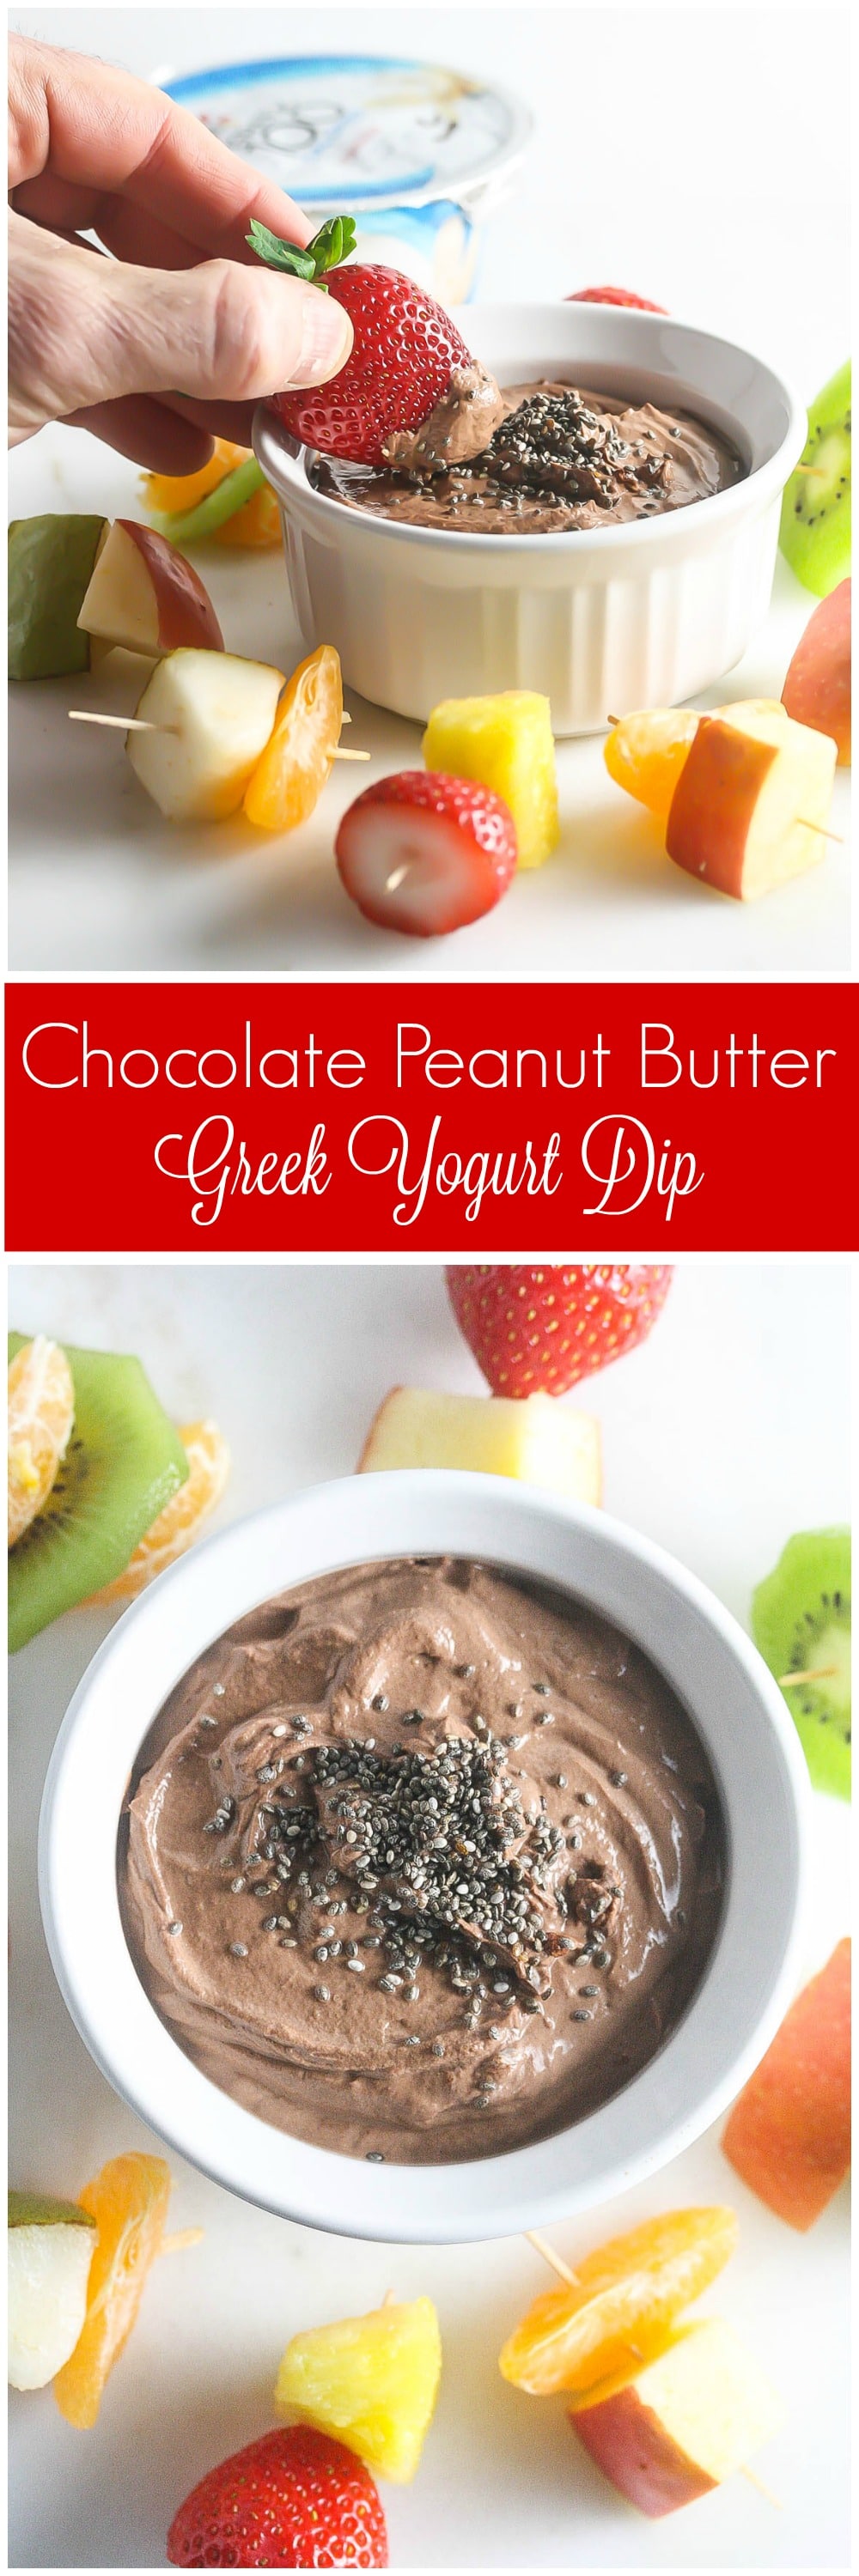 This Chocolate Peanut Butter Dip is packed with protein, antioxidants and fiber and taste DELICIOUS! www.laurenkellynutrition.com